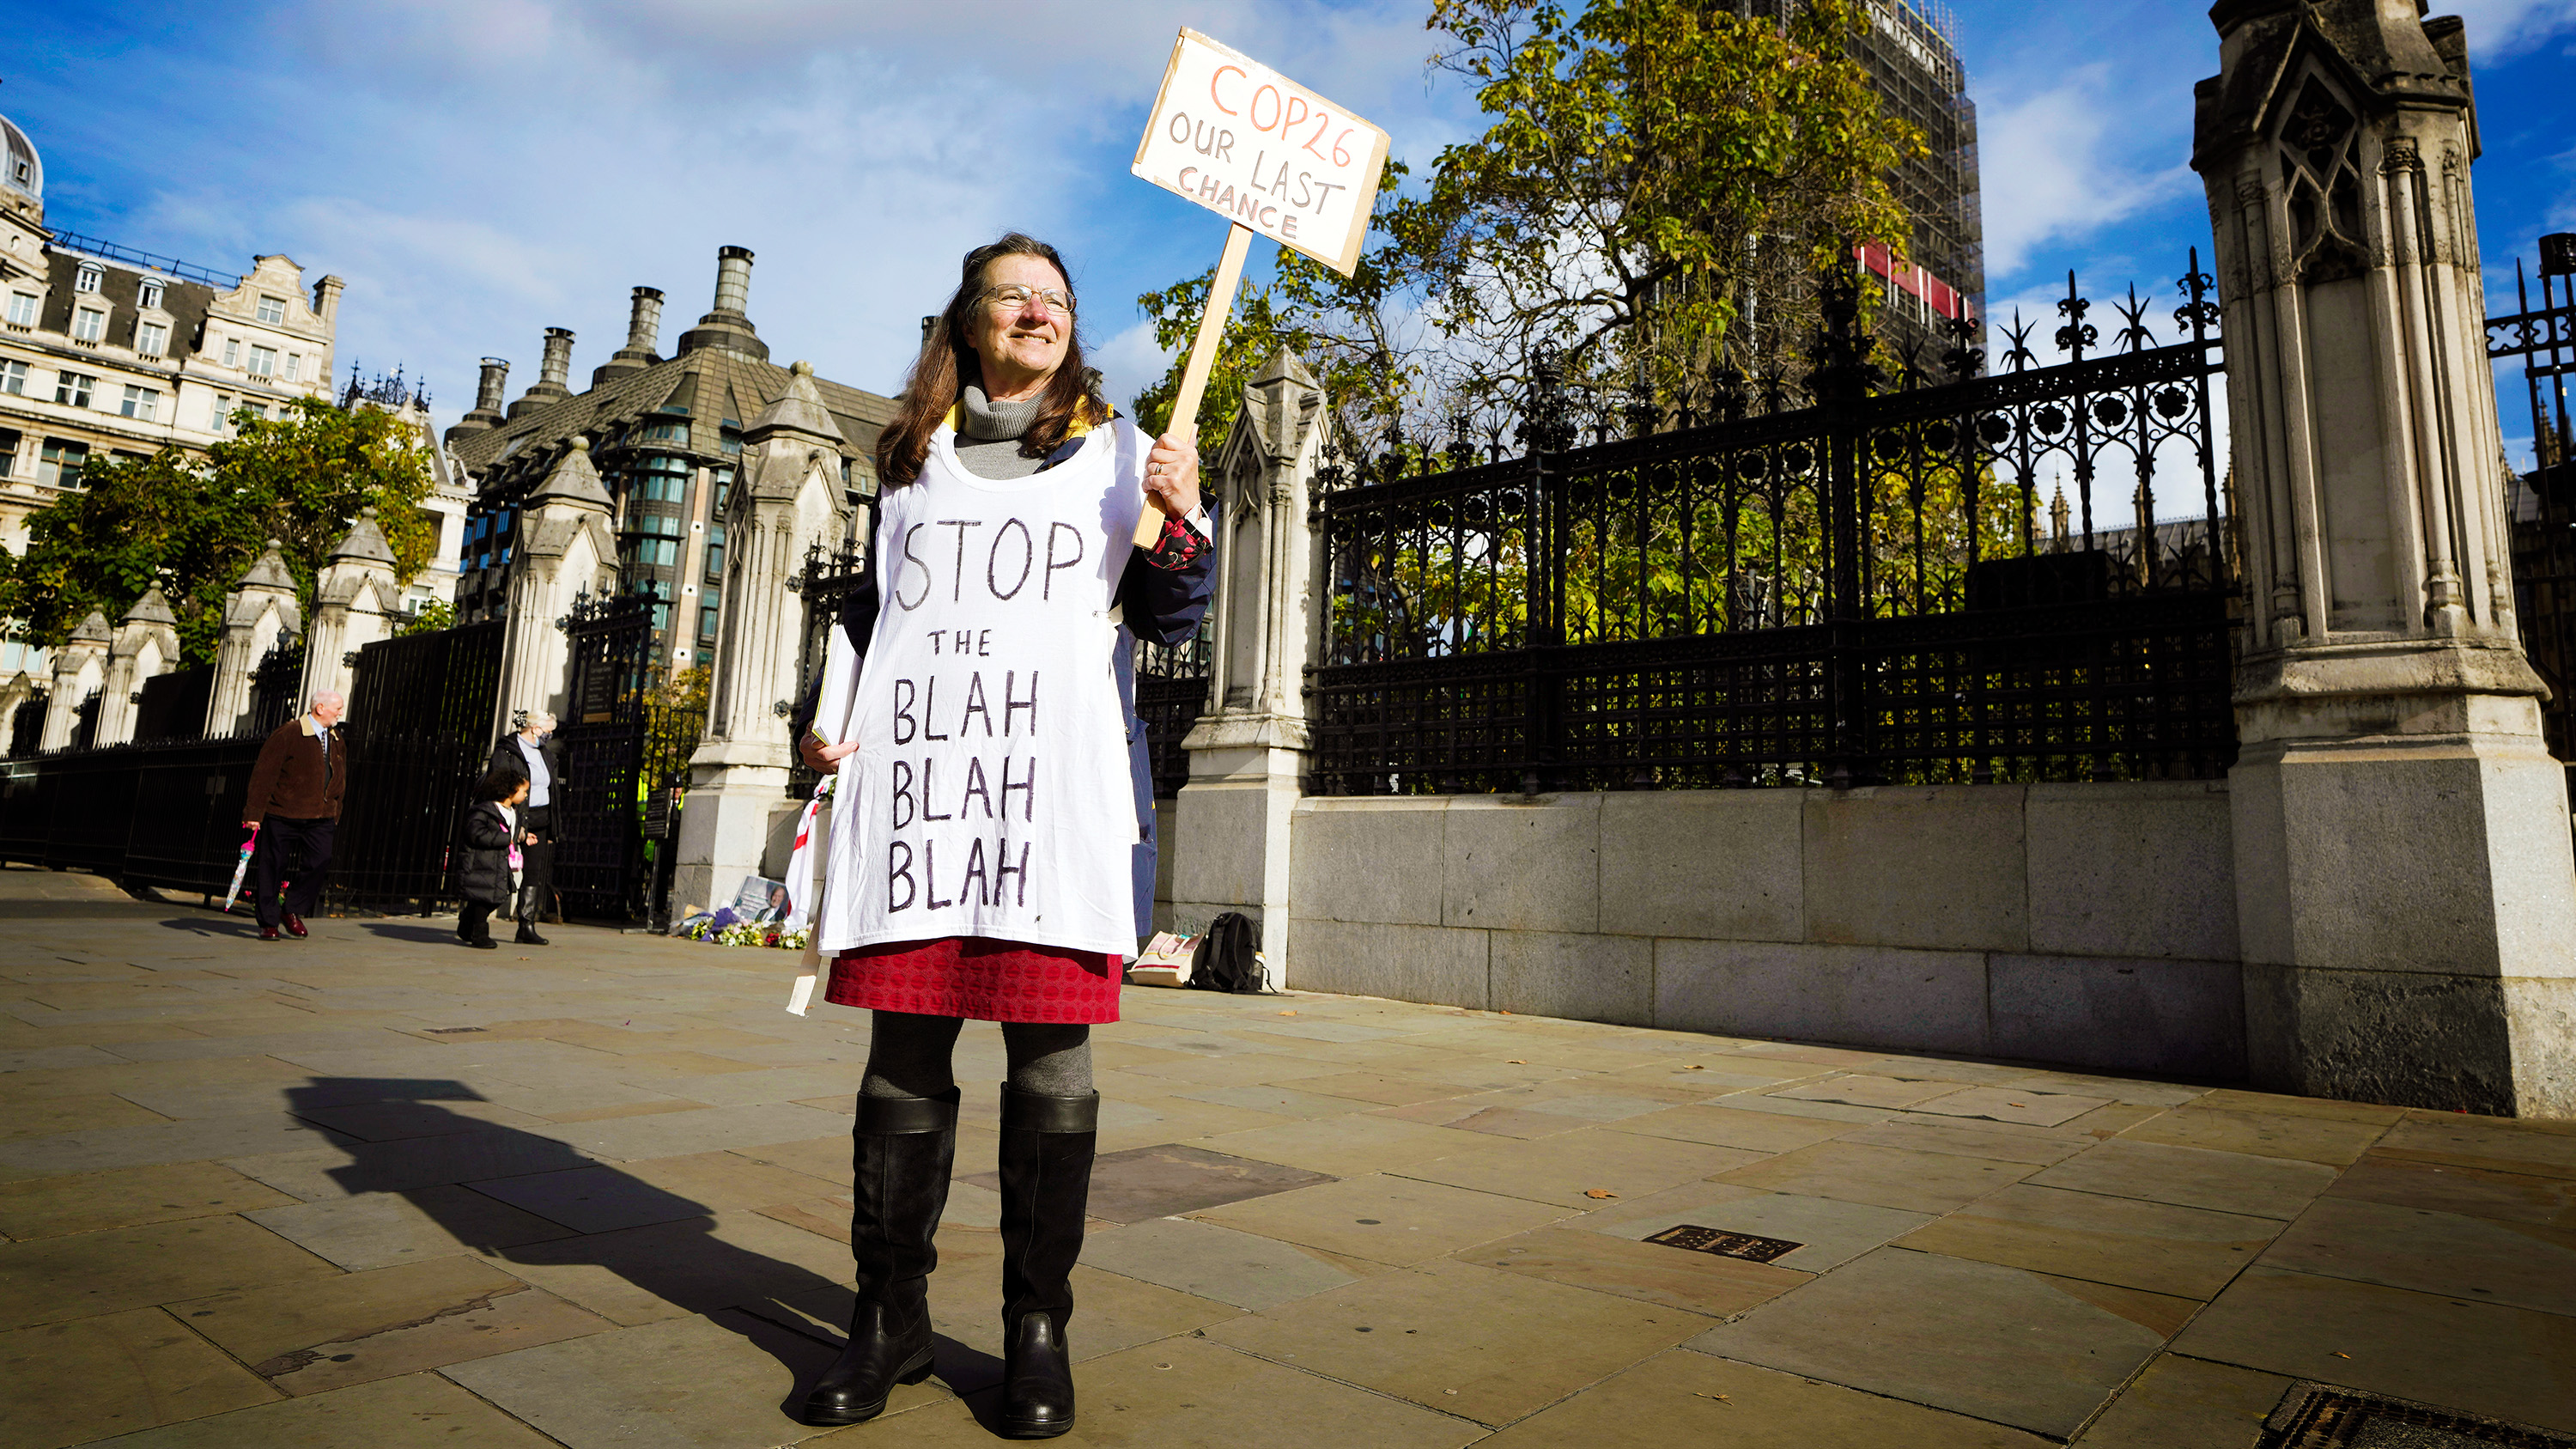 A lone climate demonstrator holds a banner outside parliament in London, Monday, Oct. 25, 2021, ahead of the UN climate conference COP26 that will be held in Glasgow, Scotland, next week.